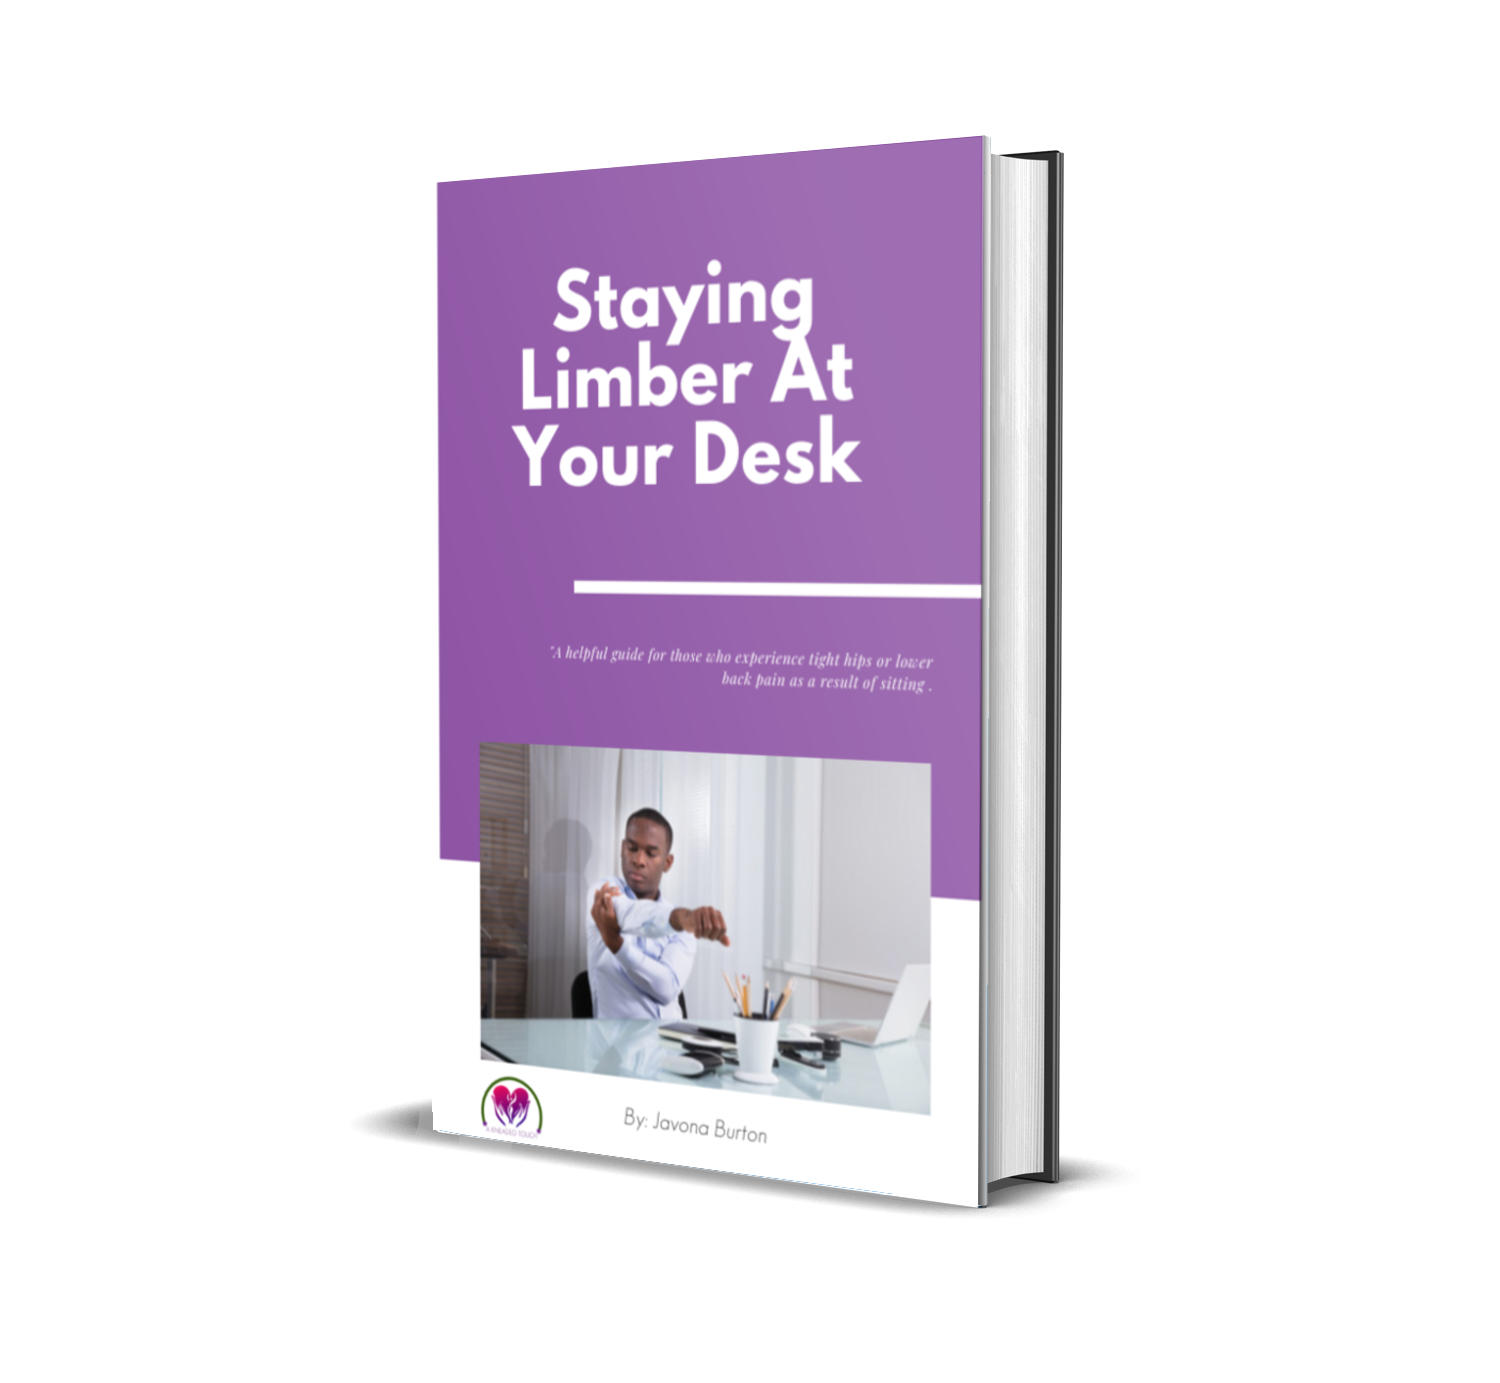 STAYING LIMBER AT YOUR DESK